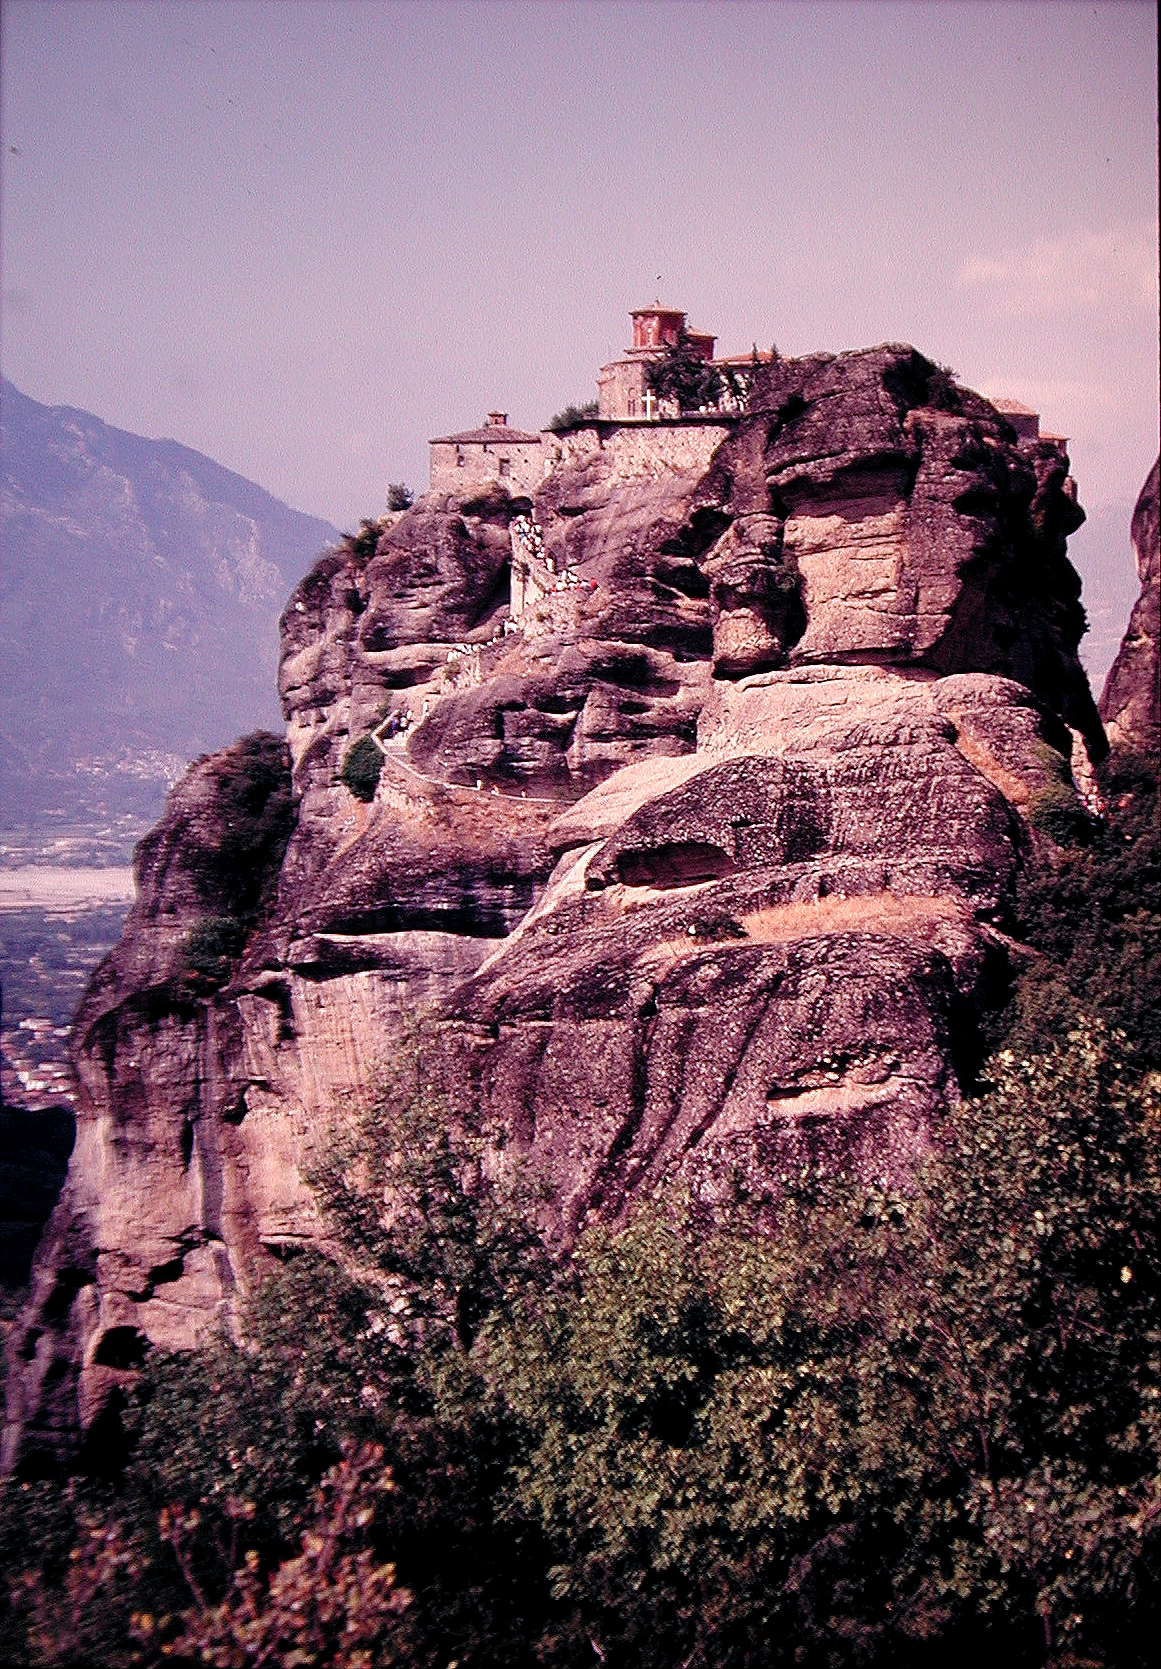 a mountain scene with an old castle on it